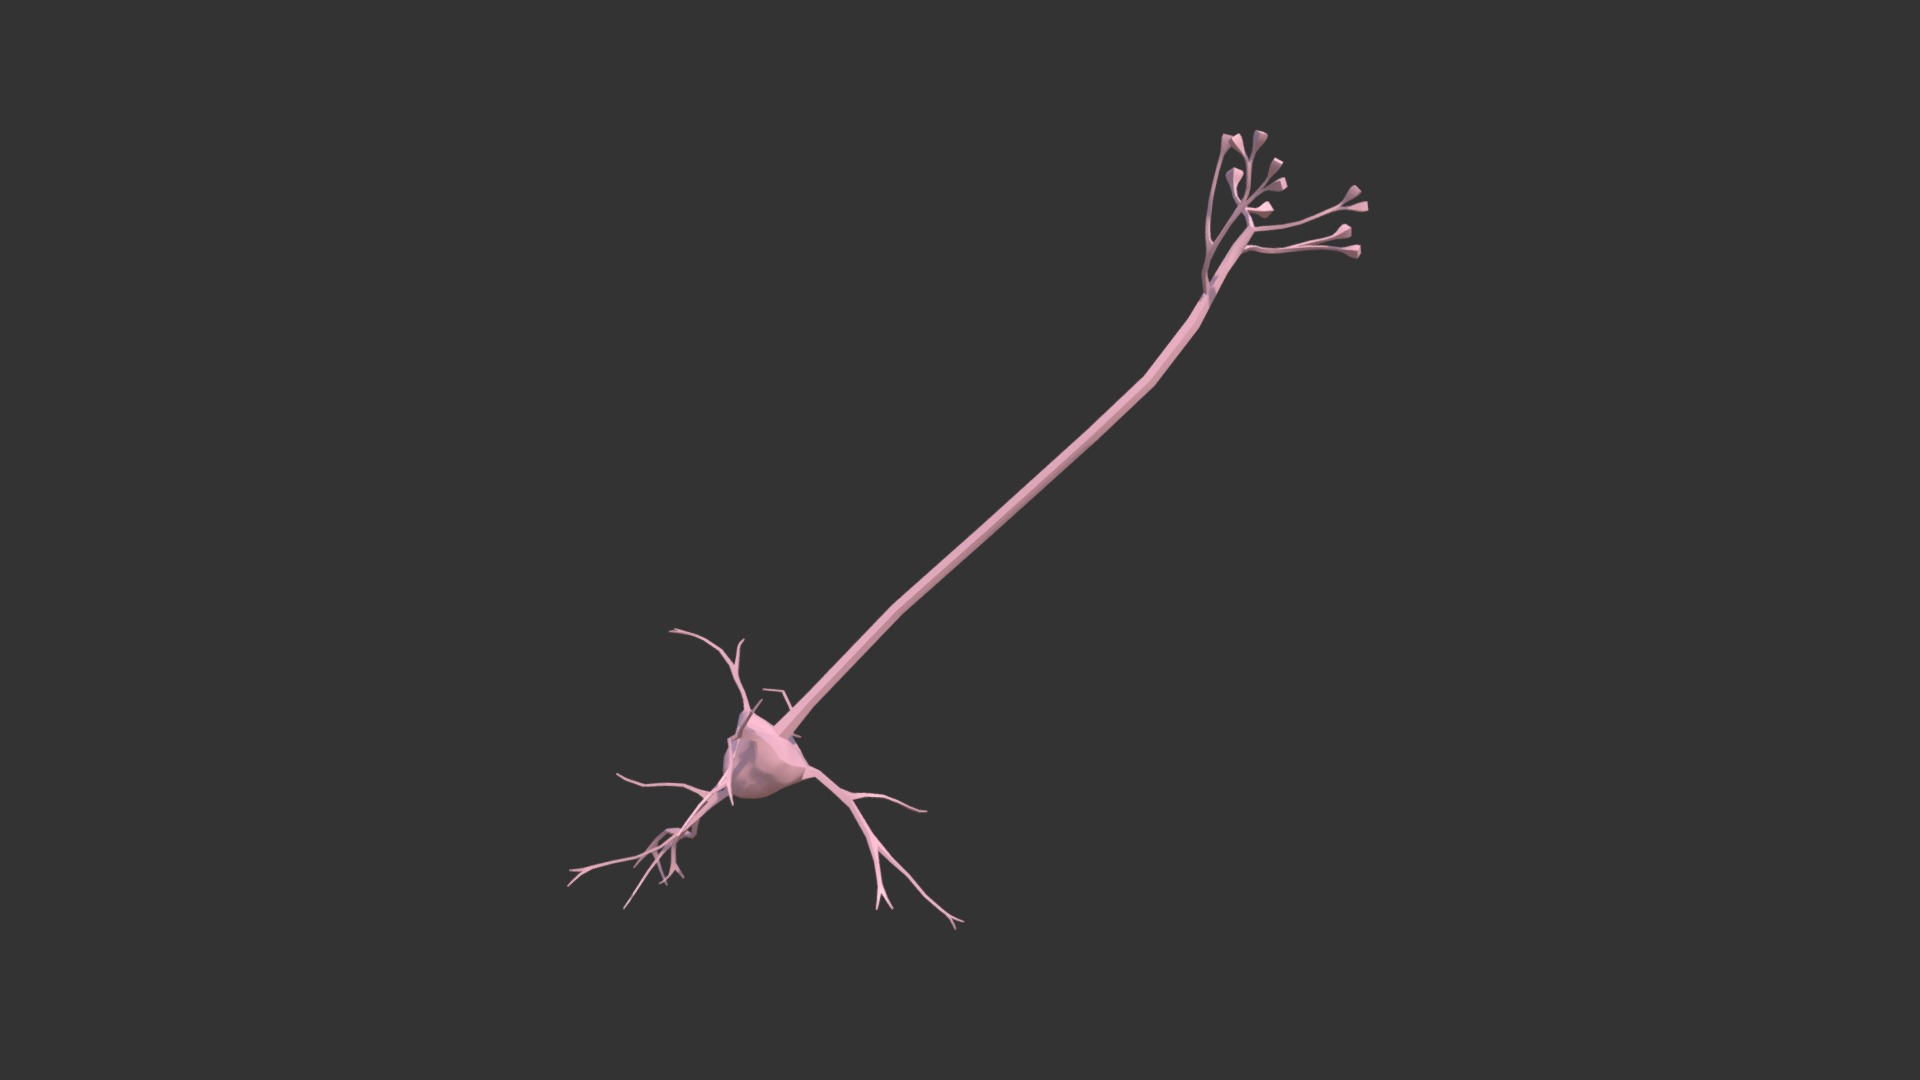 3D model Neuron - This is a 3D model of the Neuron. The 3D model is about a drawing of a unicorn.